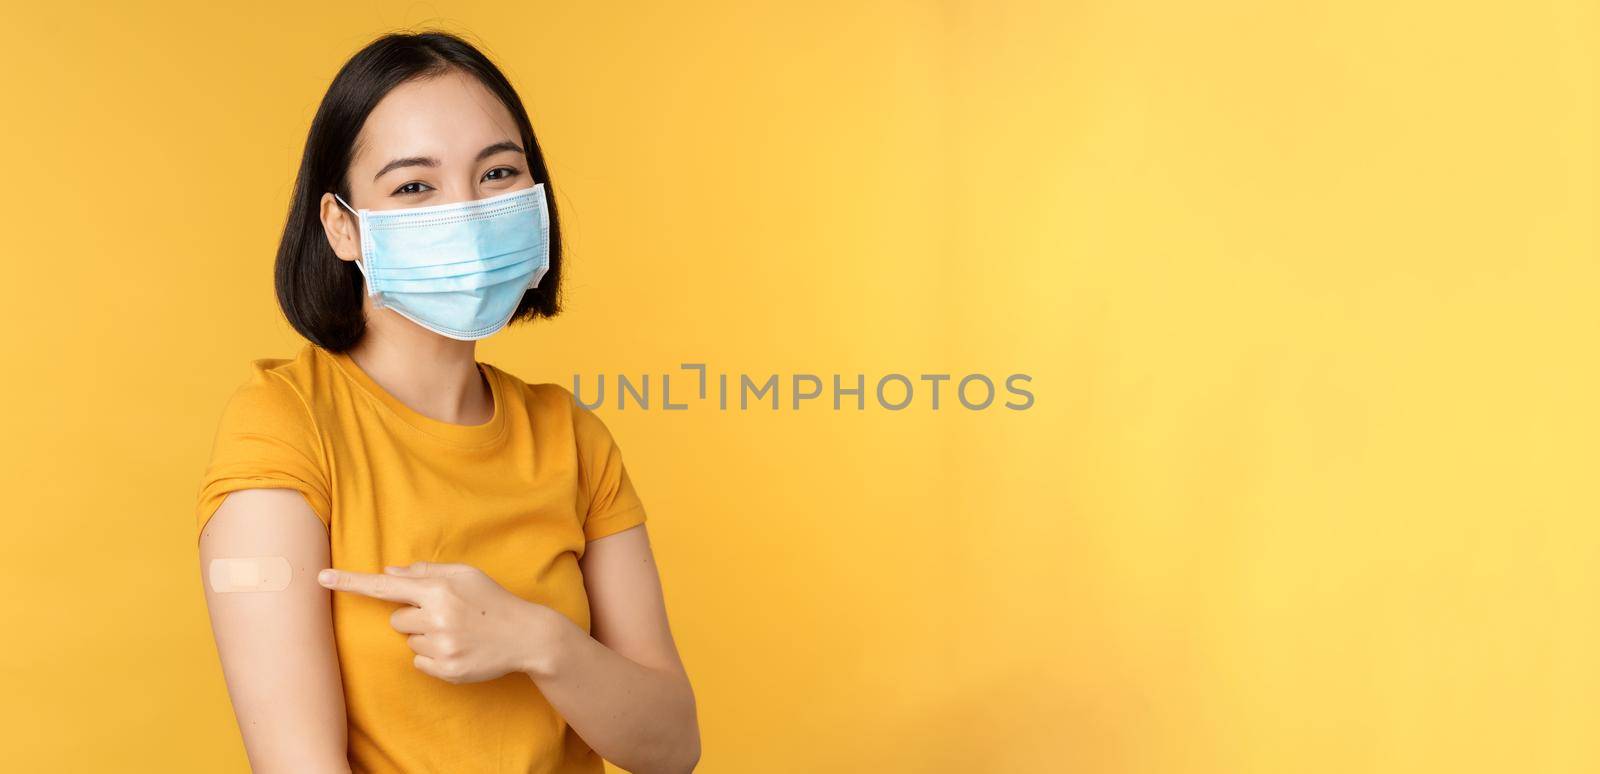 Vaccination and covid-19 pandemic concept. Smiling asian woman in medical face mask, showing her shoulder with band aid after vaccinating from coronavirus, yellow background.